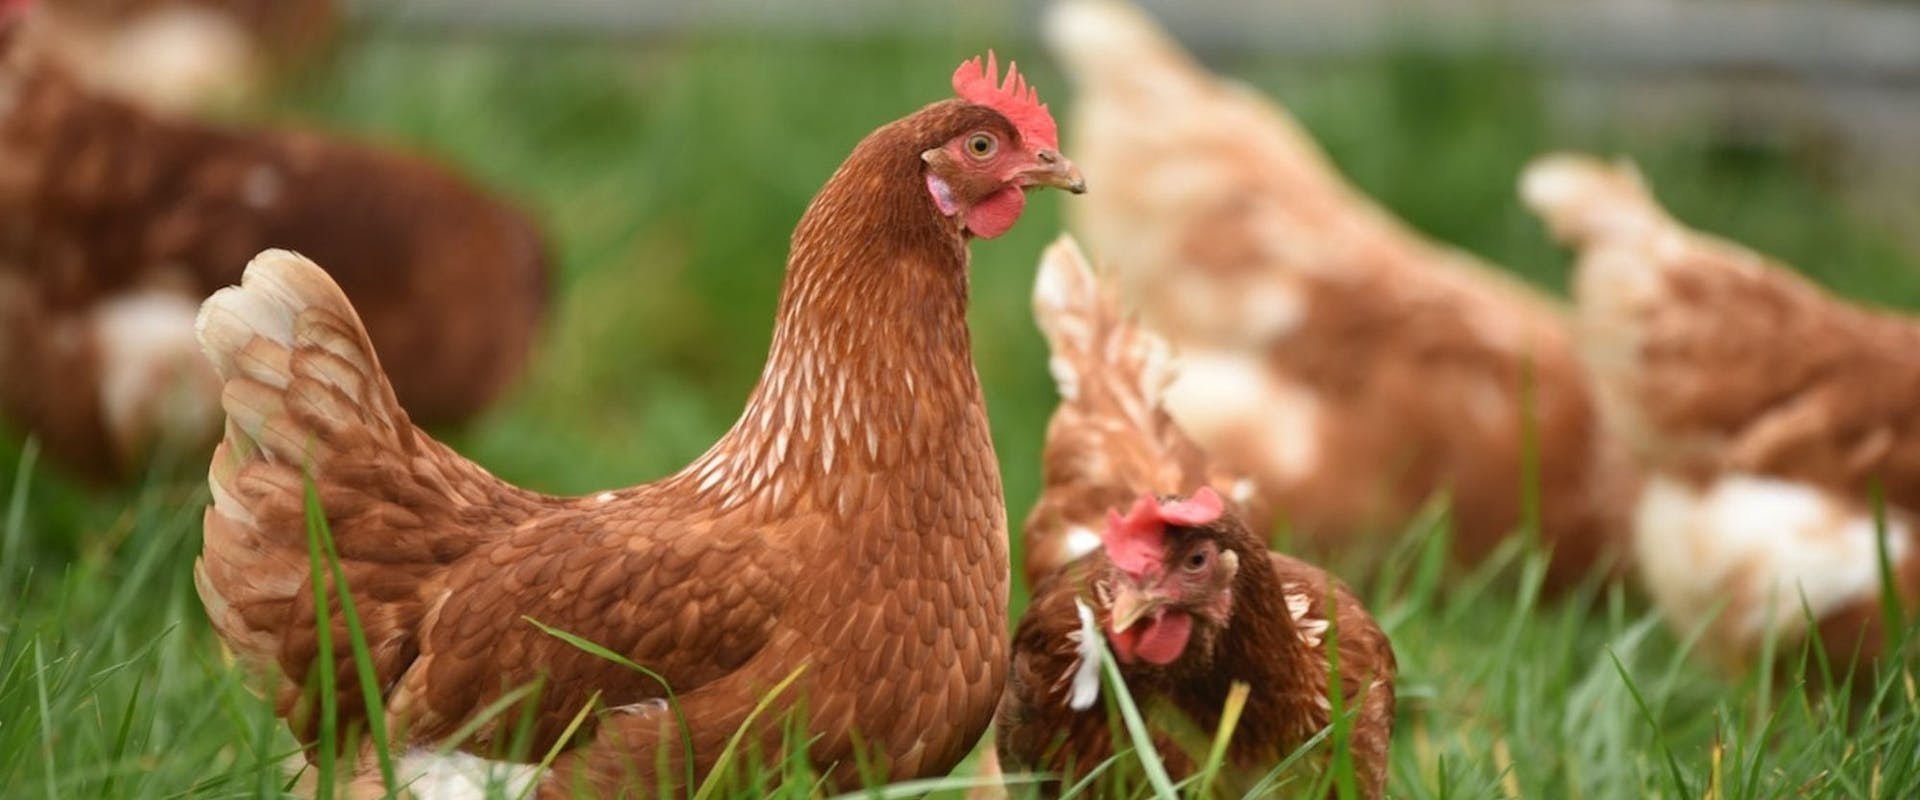 Good eggs: how chickens are changing lives and enhancing wellbeing